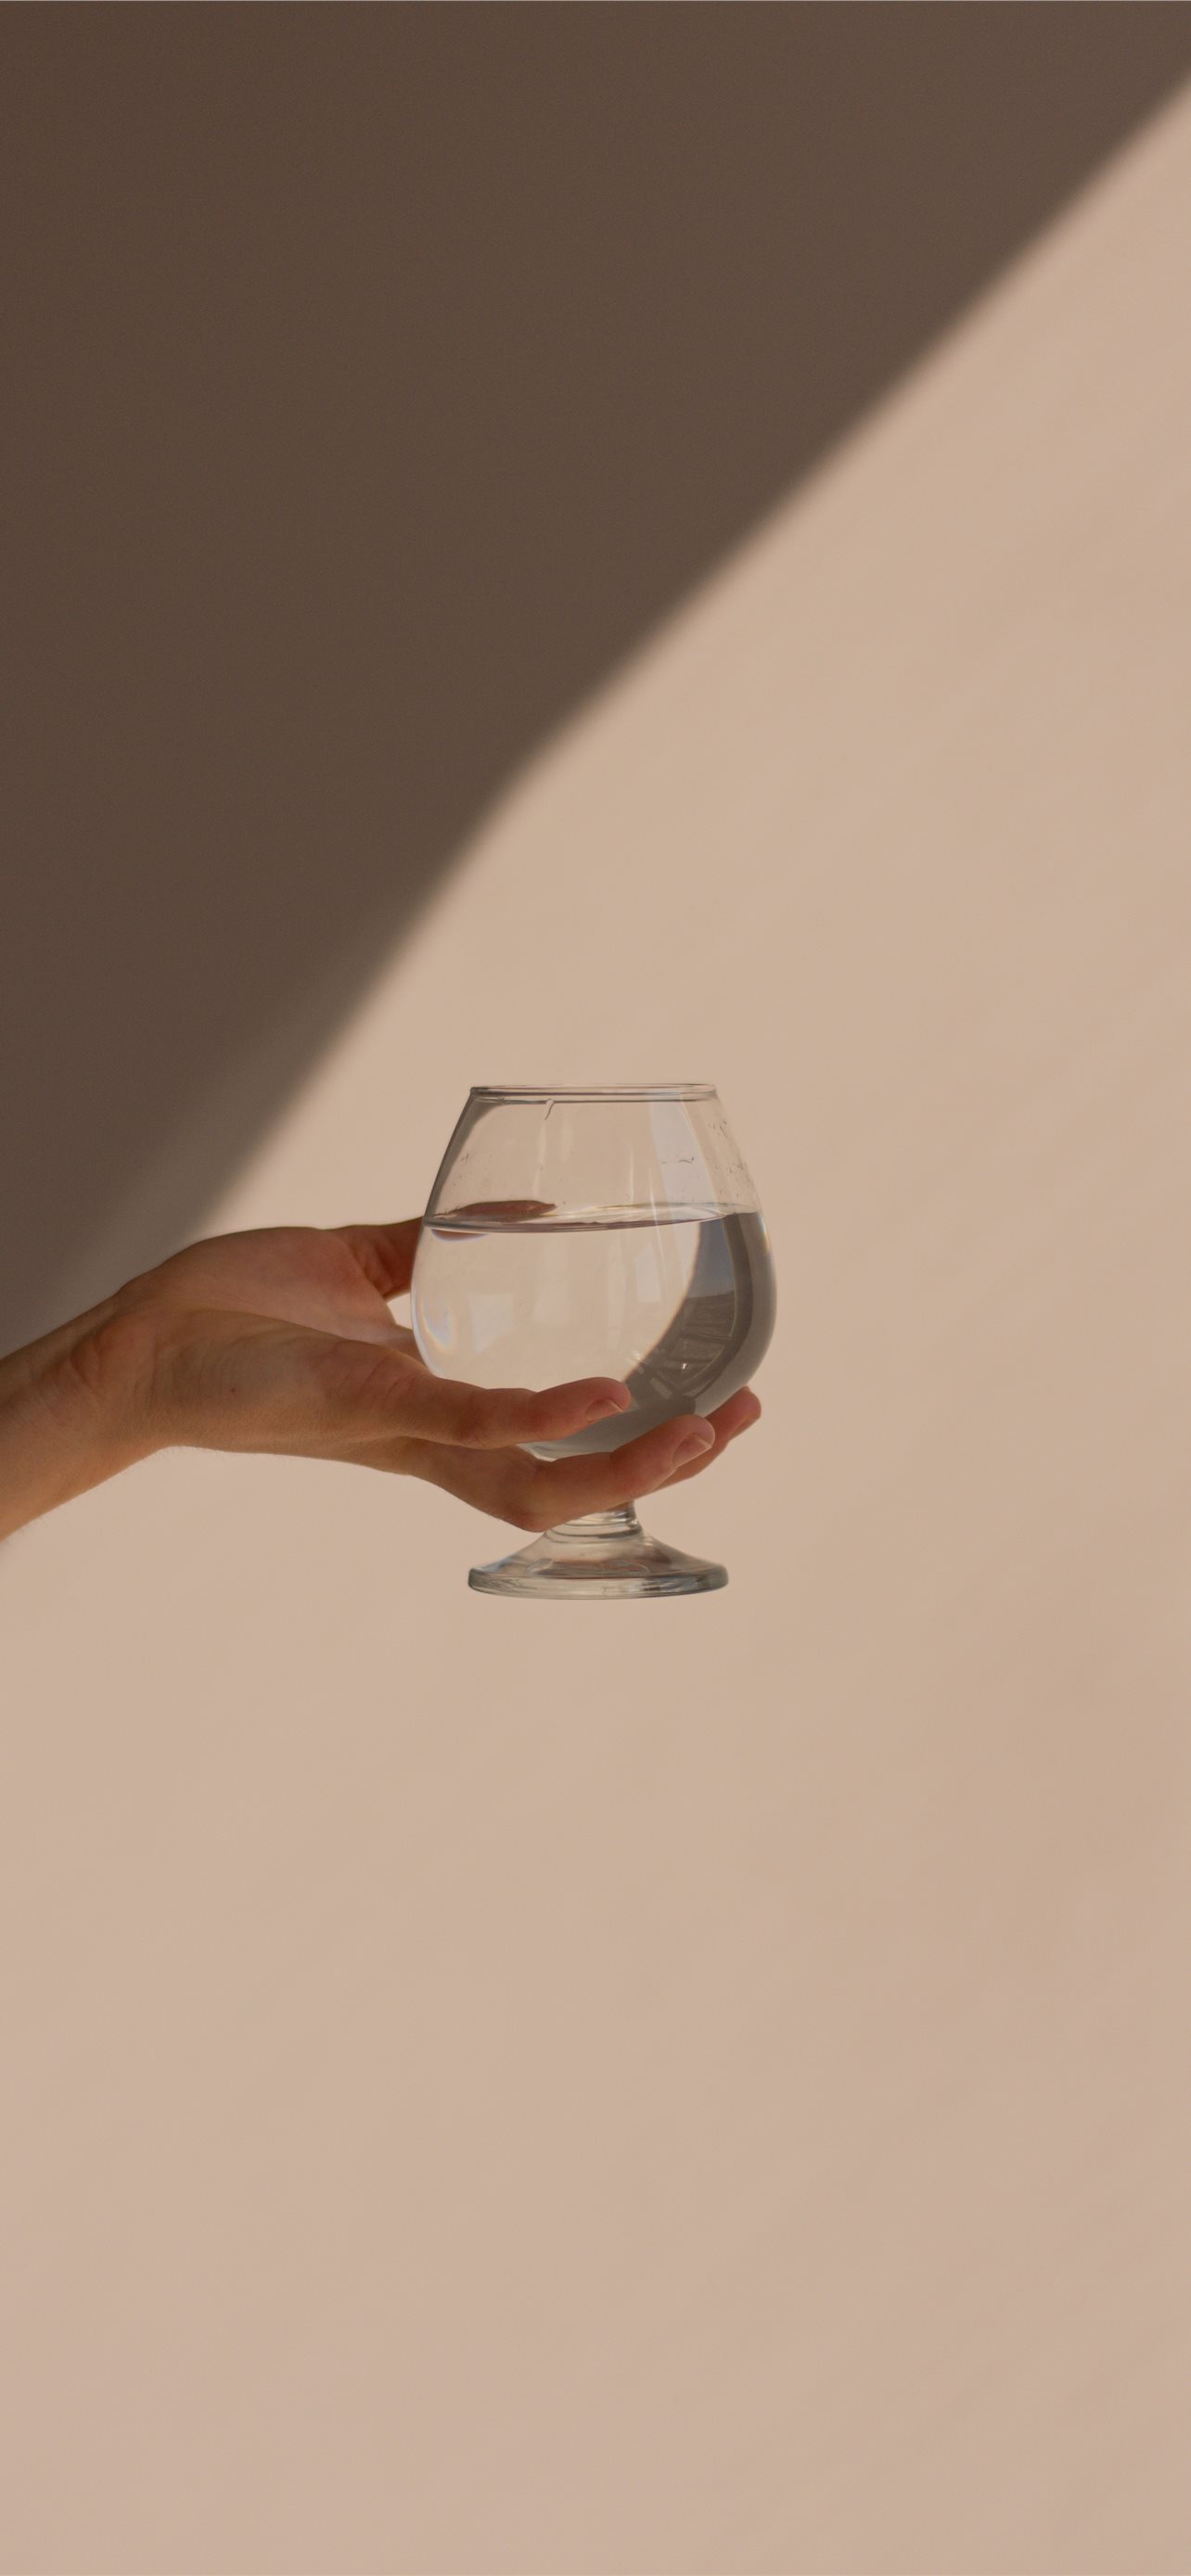 person holding clear wine glass iPhone Wallpapers Free Download